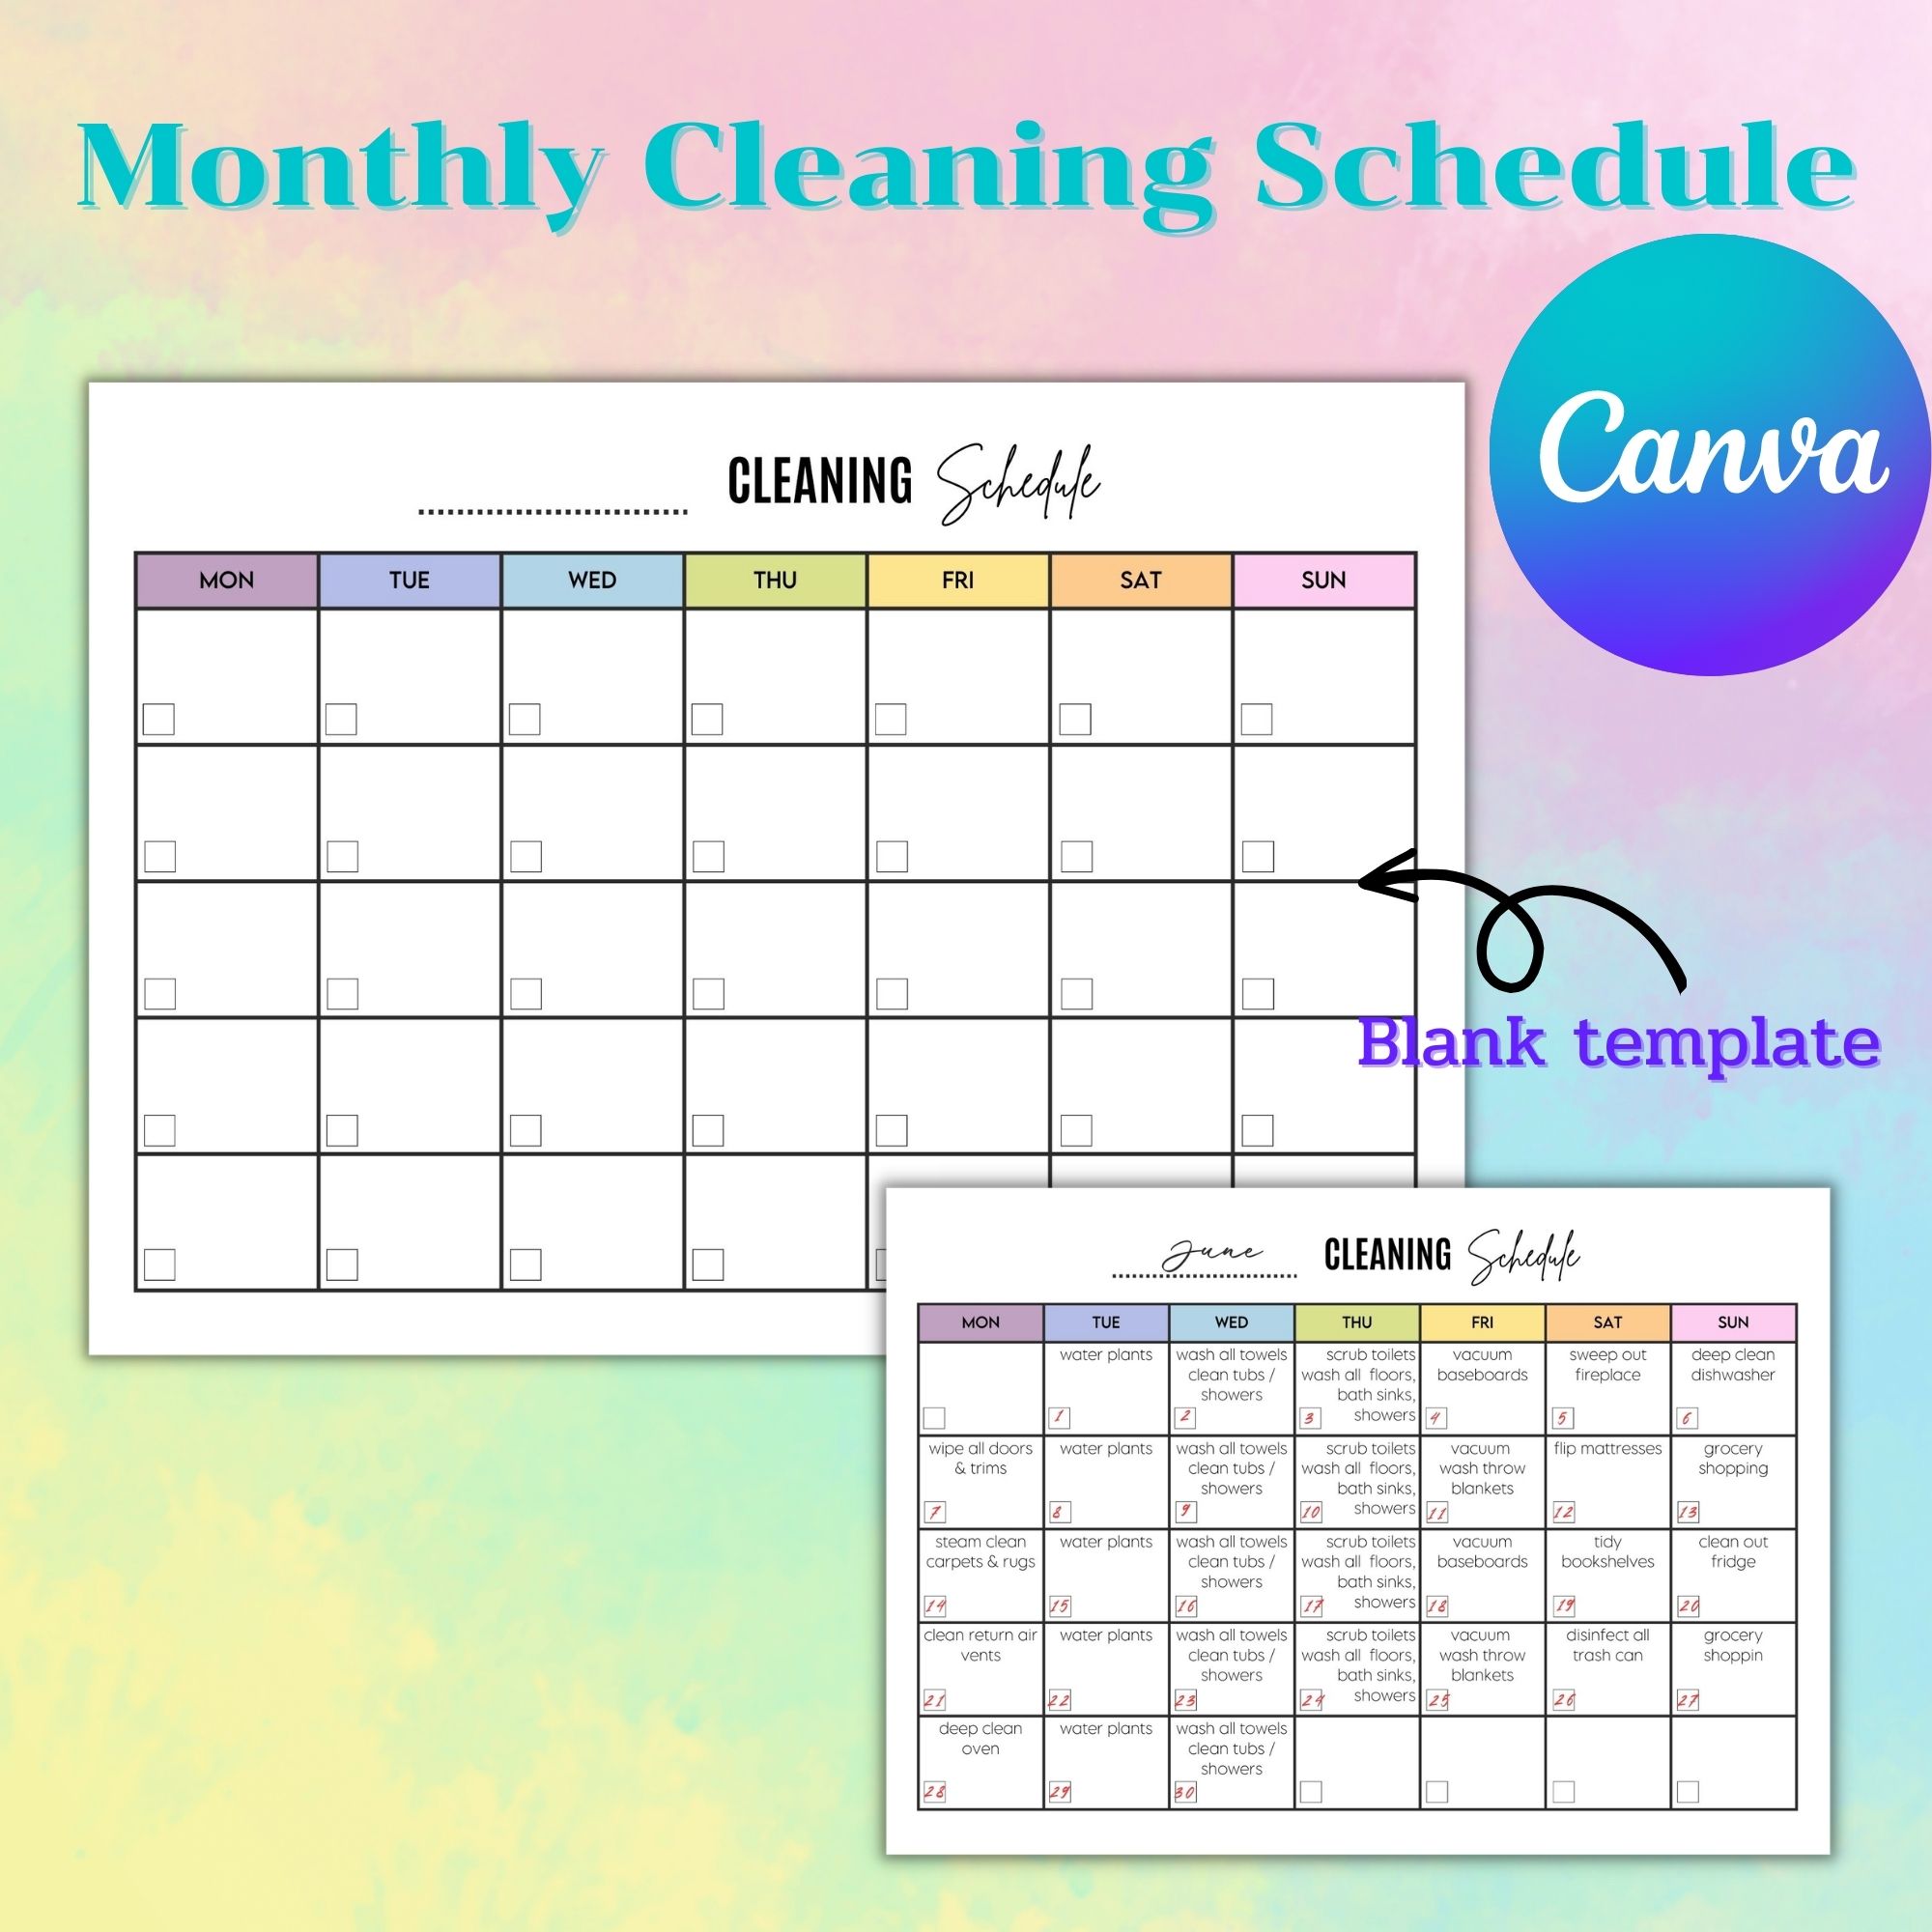 Printable cleaning schedule and a cleaning schedule.